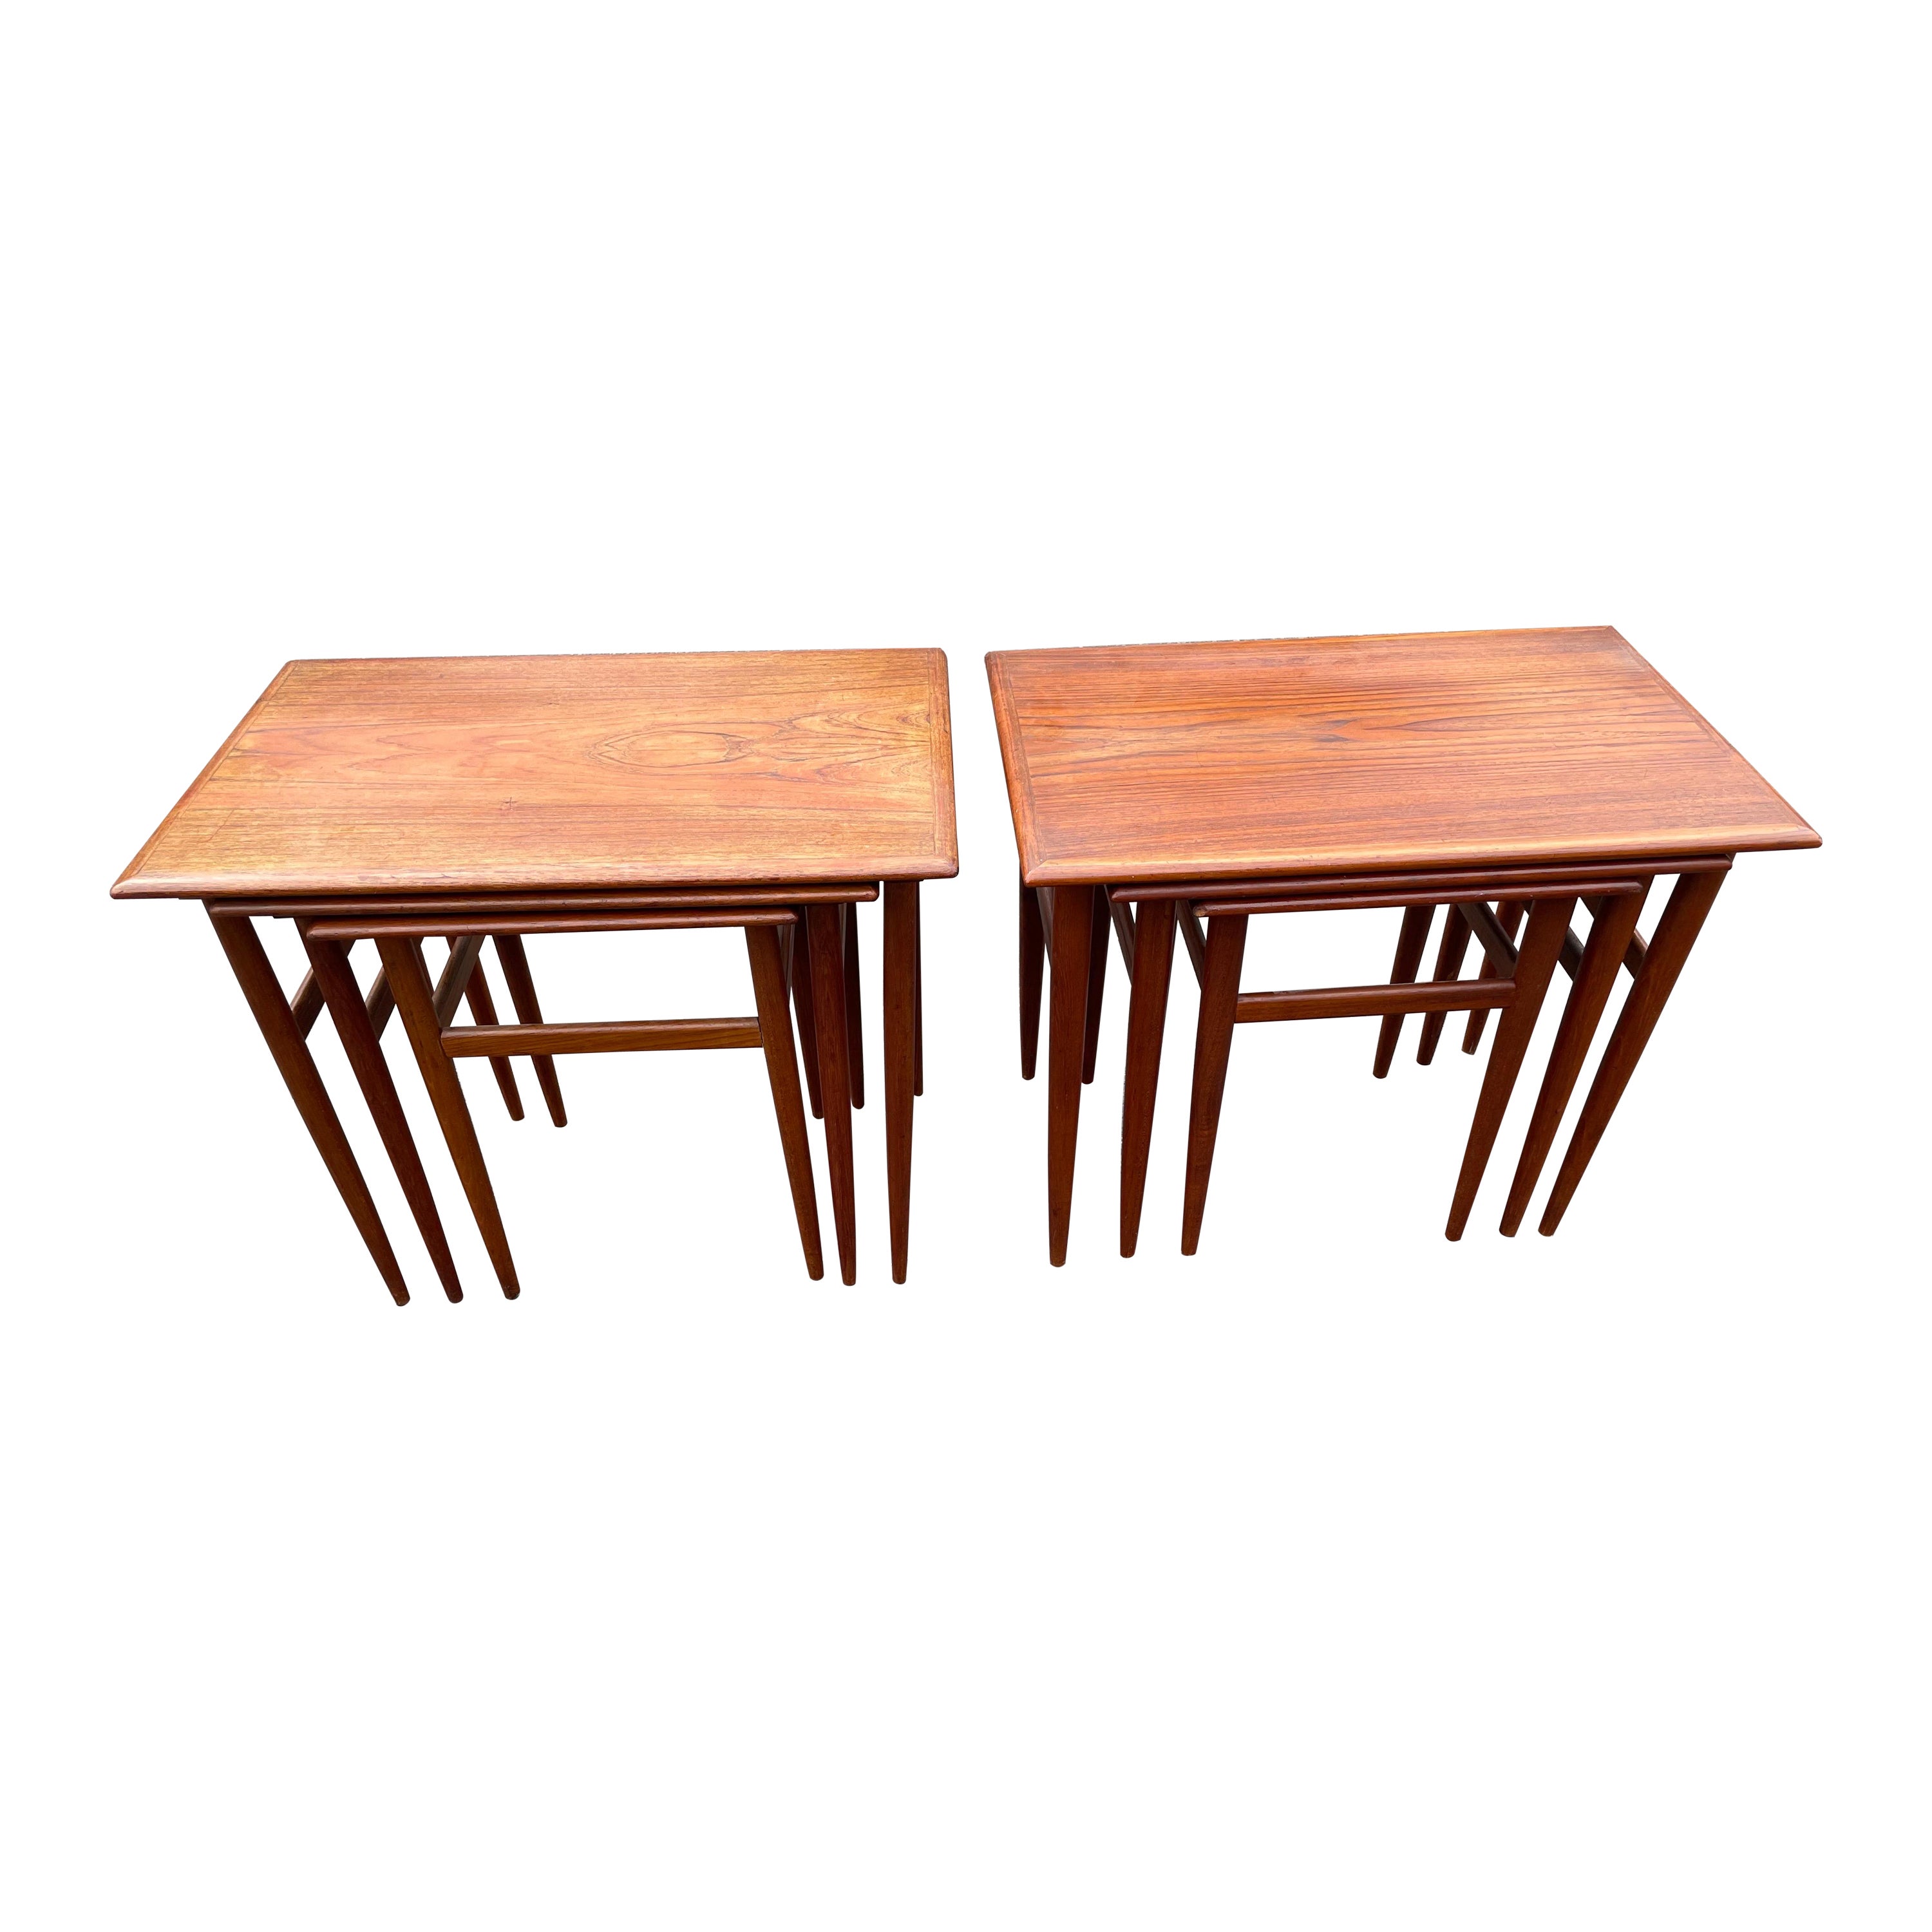 Pair of Identical Danish Teak Nesting Tables from the, 1960s For Sale